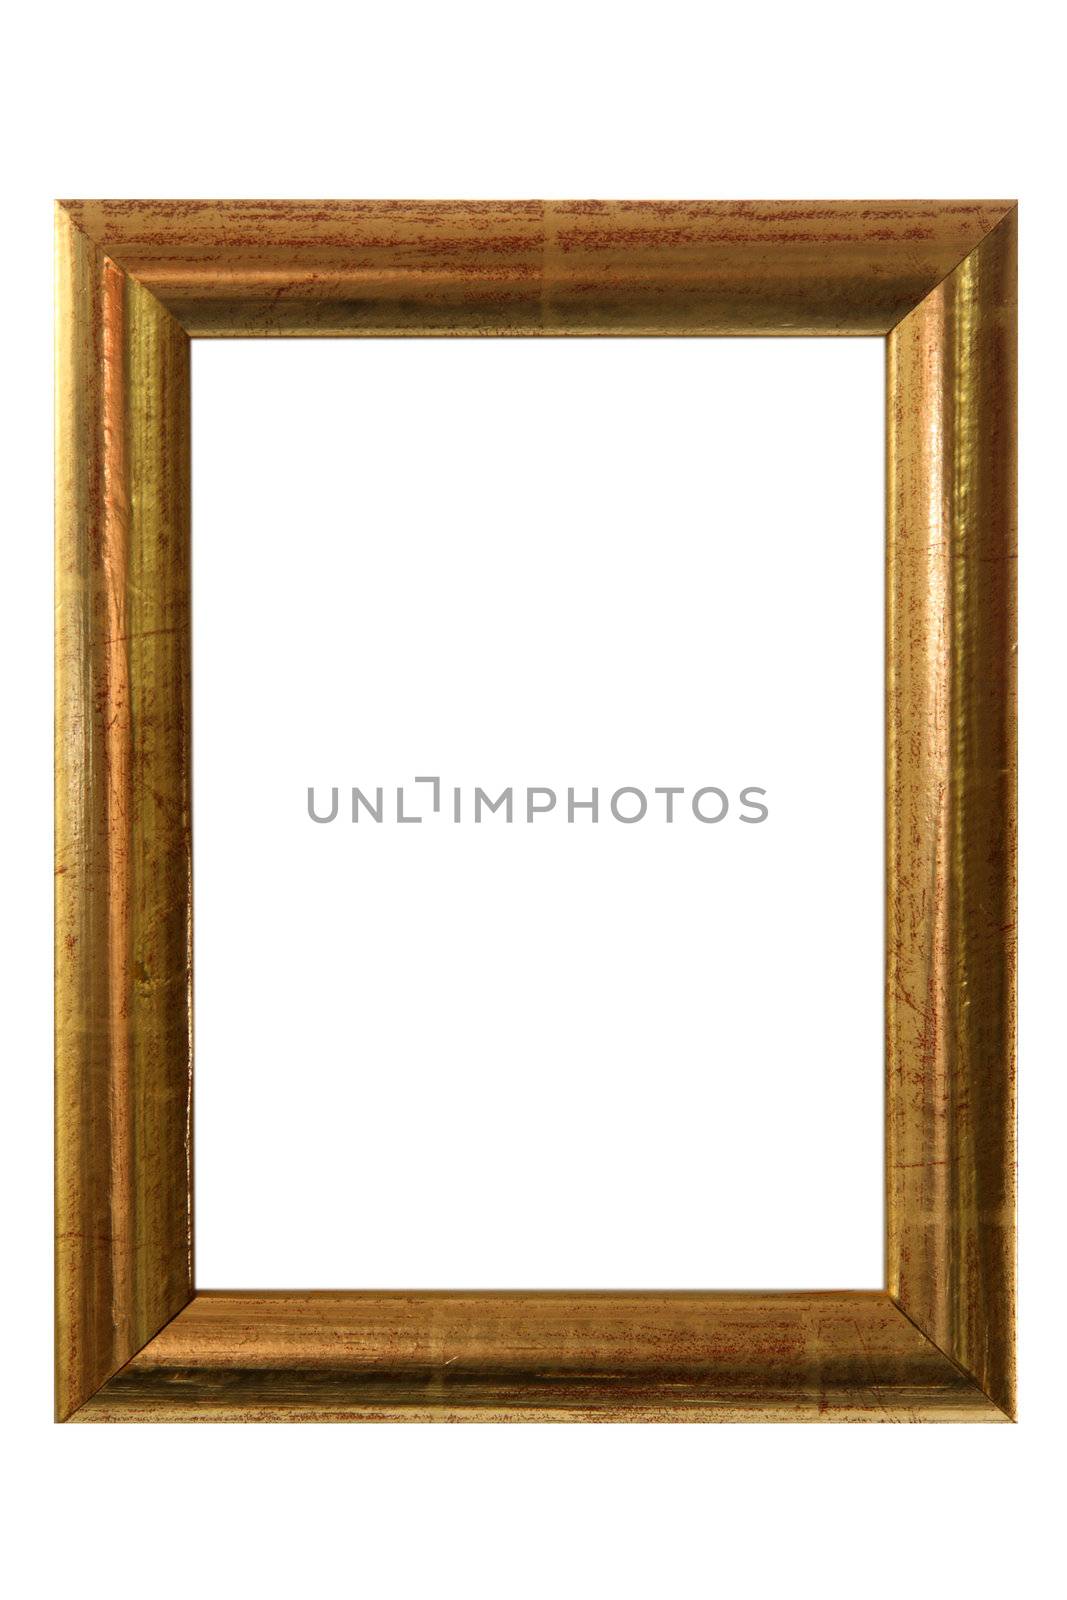 Picture frame by Teamarbeit